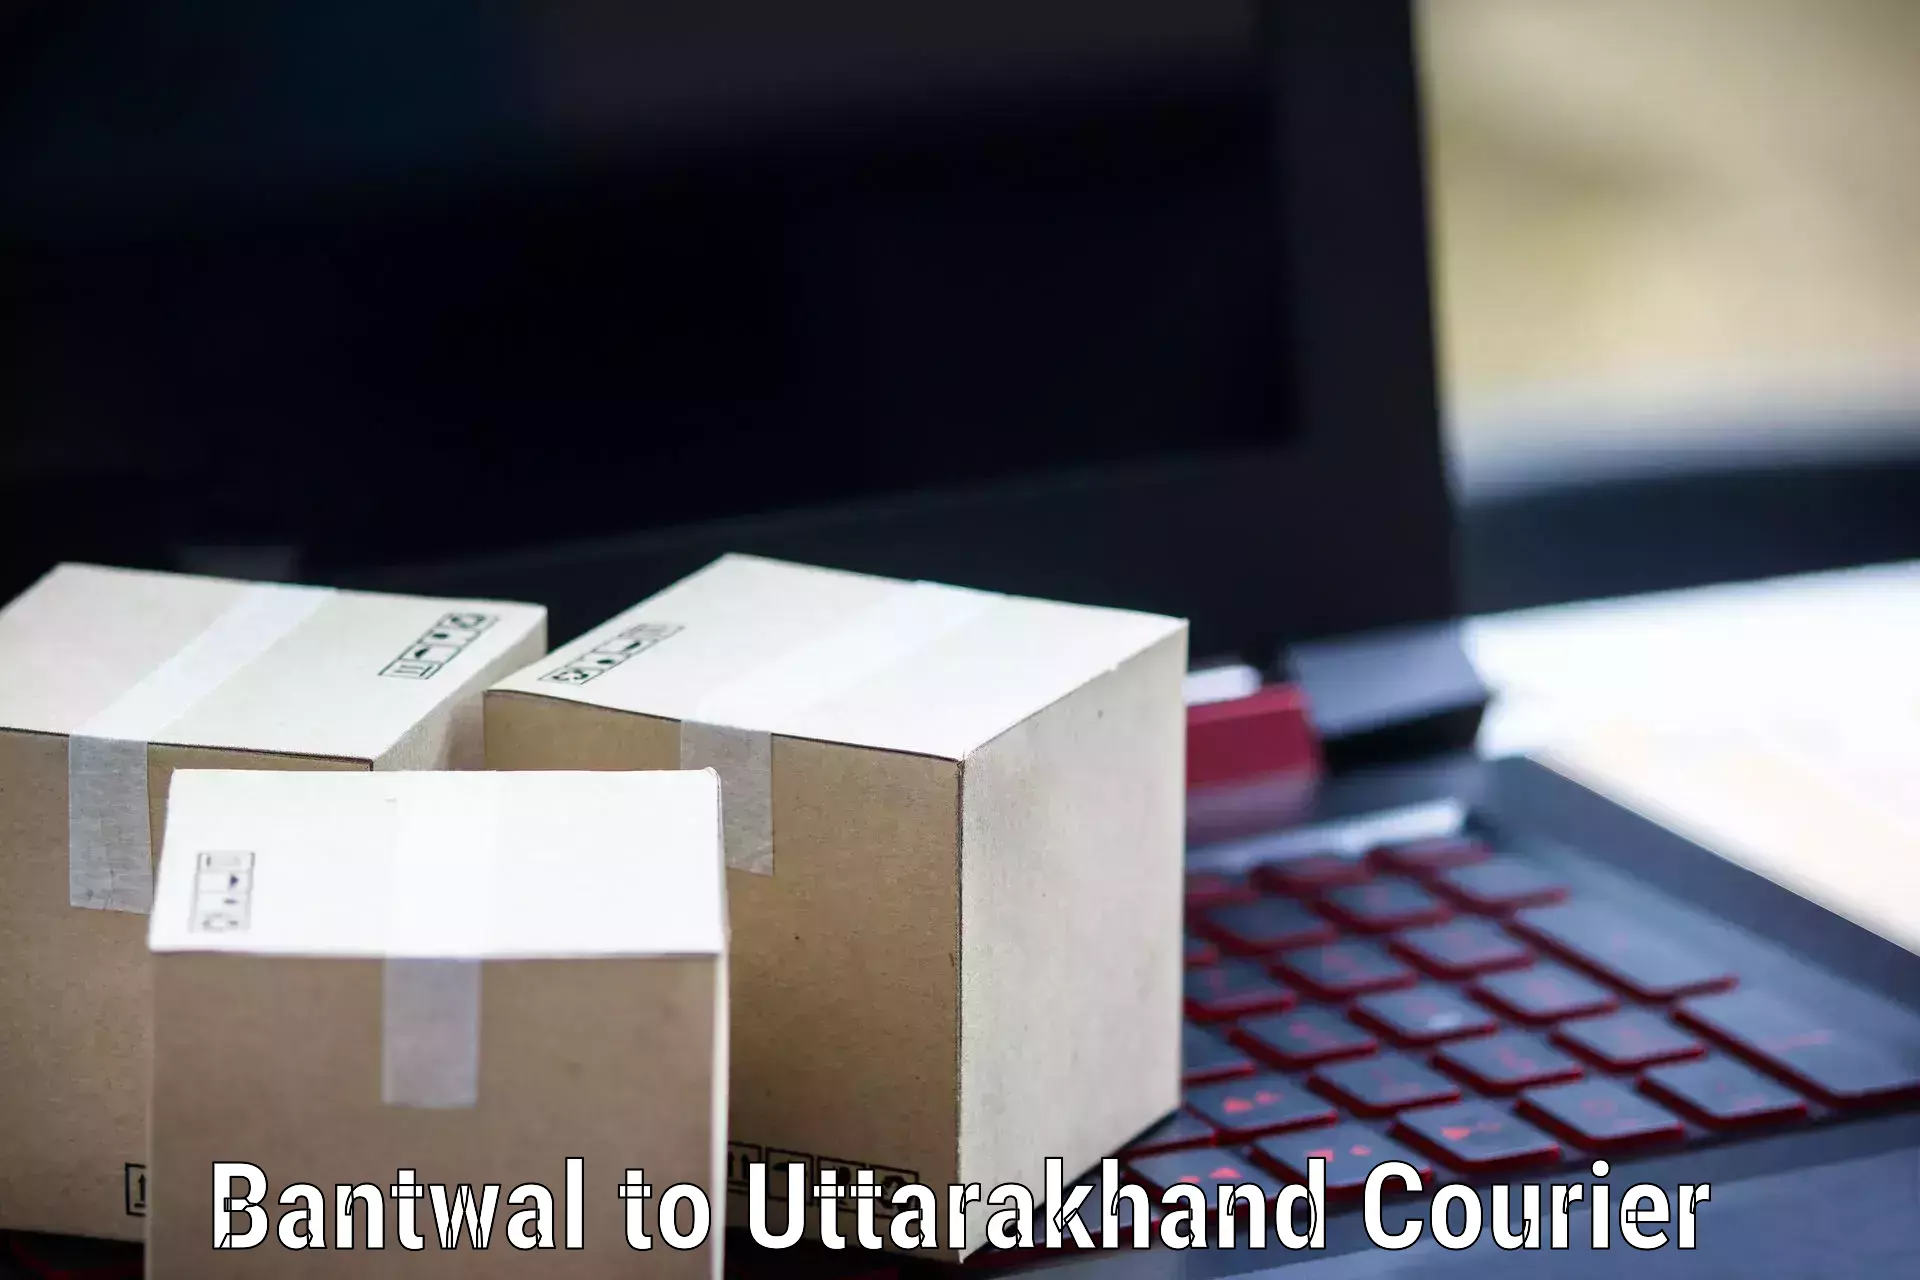 Multi-national courier services Bantwal to Kashipur